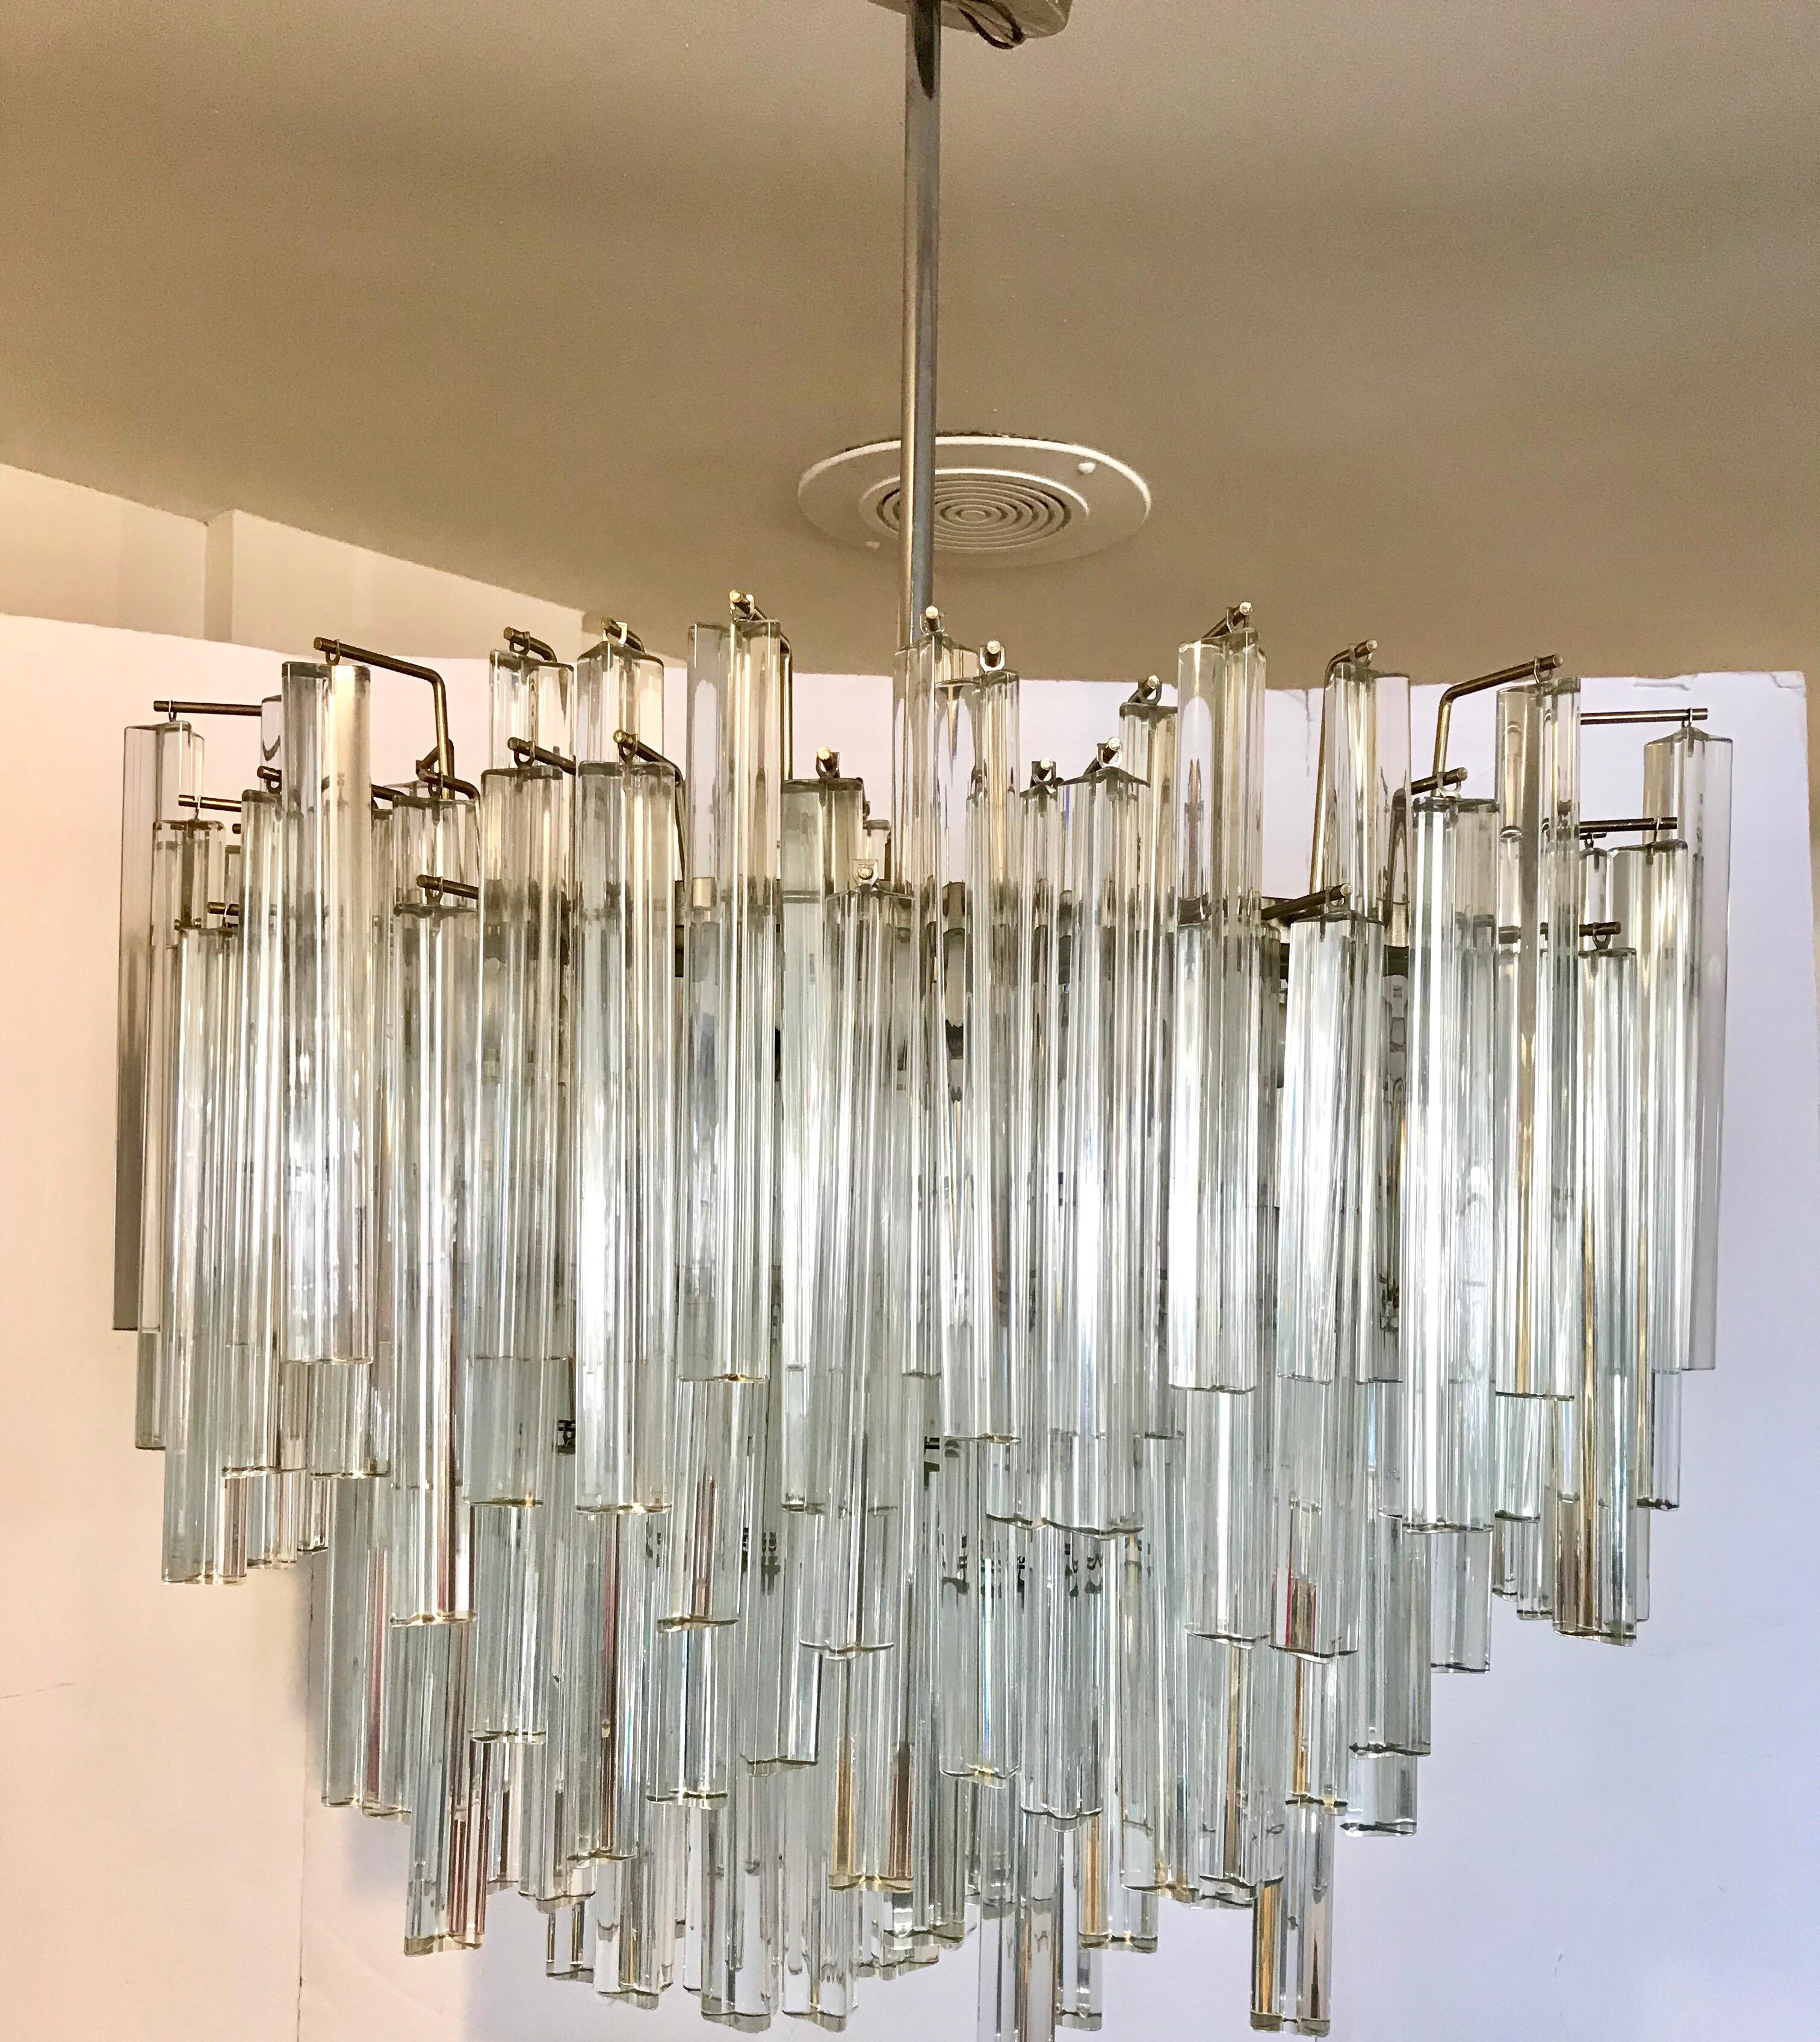 Stunning signed Camer glass midcentury monumental waterfall chandelier. The waterfall design is
realized by Camer's use of two different sized Murano glass prisms. The light that reflects off this work of art is truly unique.